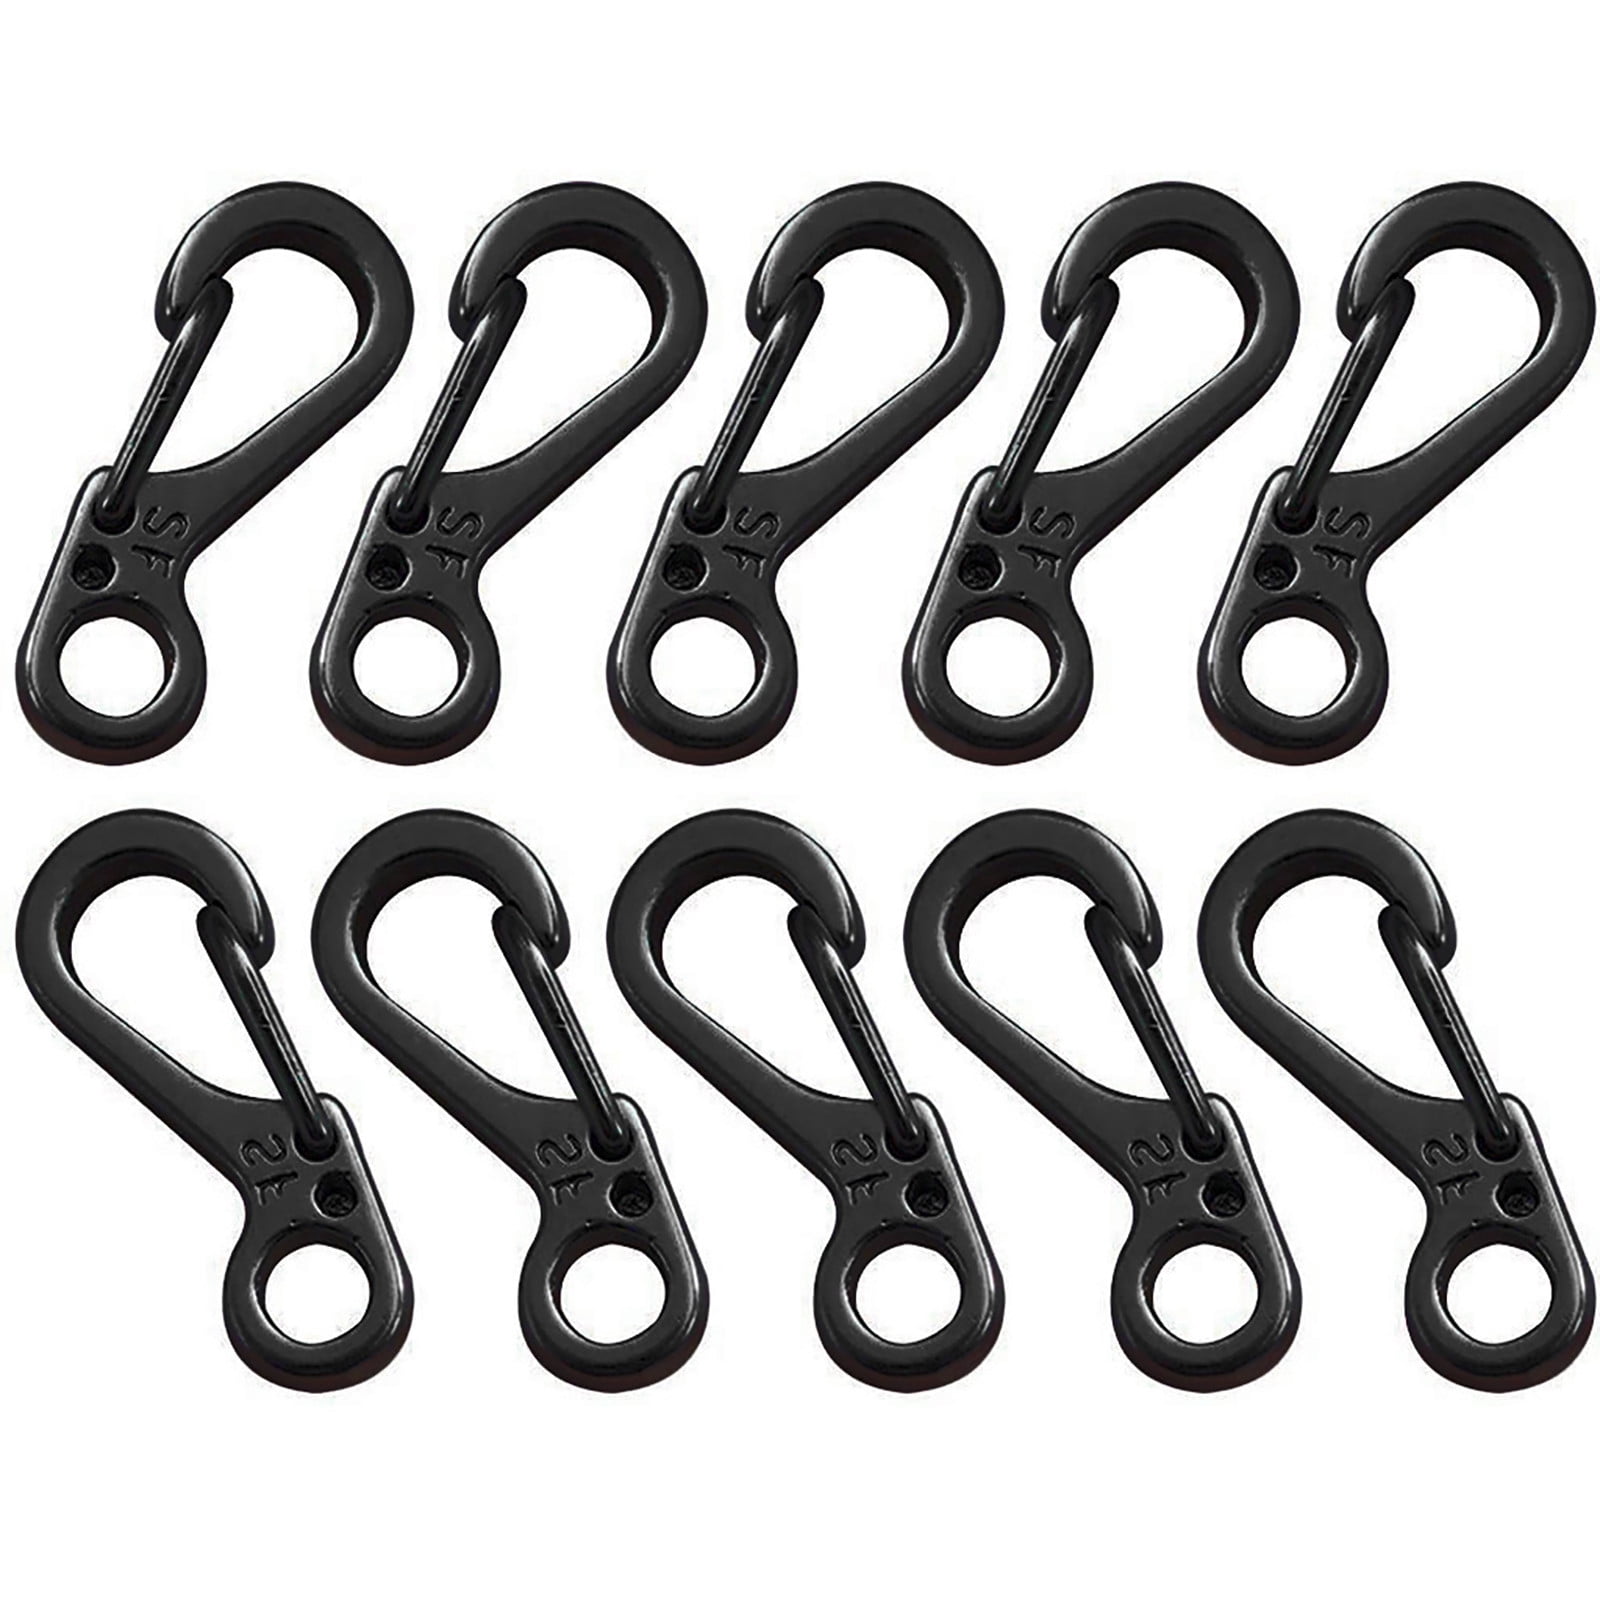 10PCS Mini Survival Carabiners Key Ring Buckle Paracord Accessories 